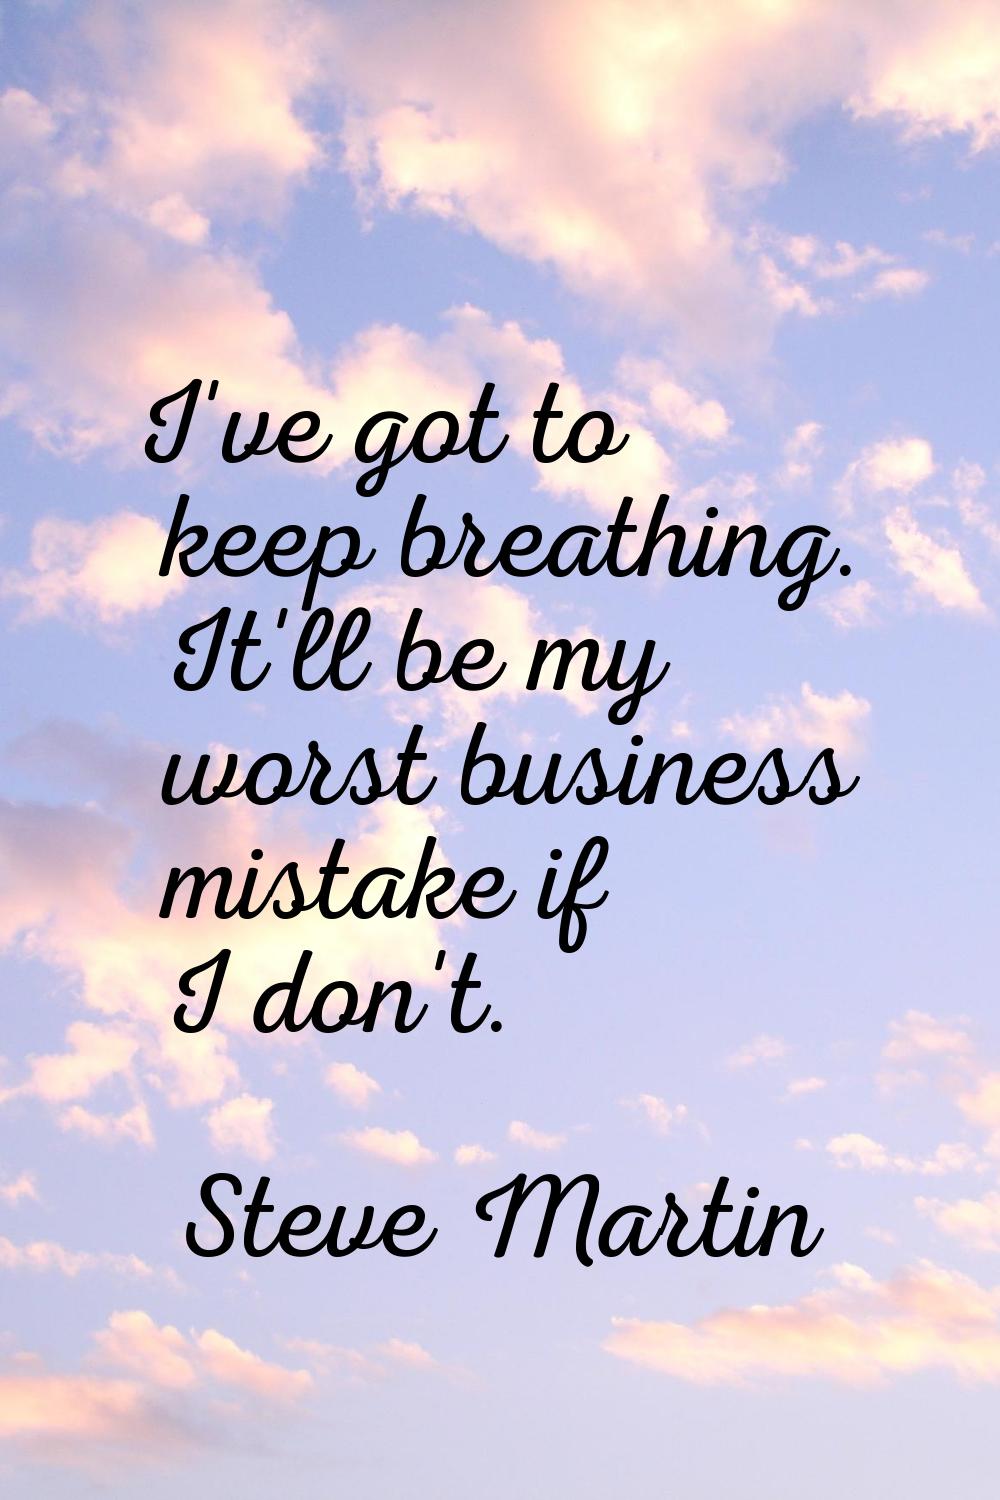 I've got to keep breathing. It'll be my worst business mistake if I don't.